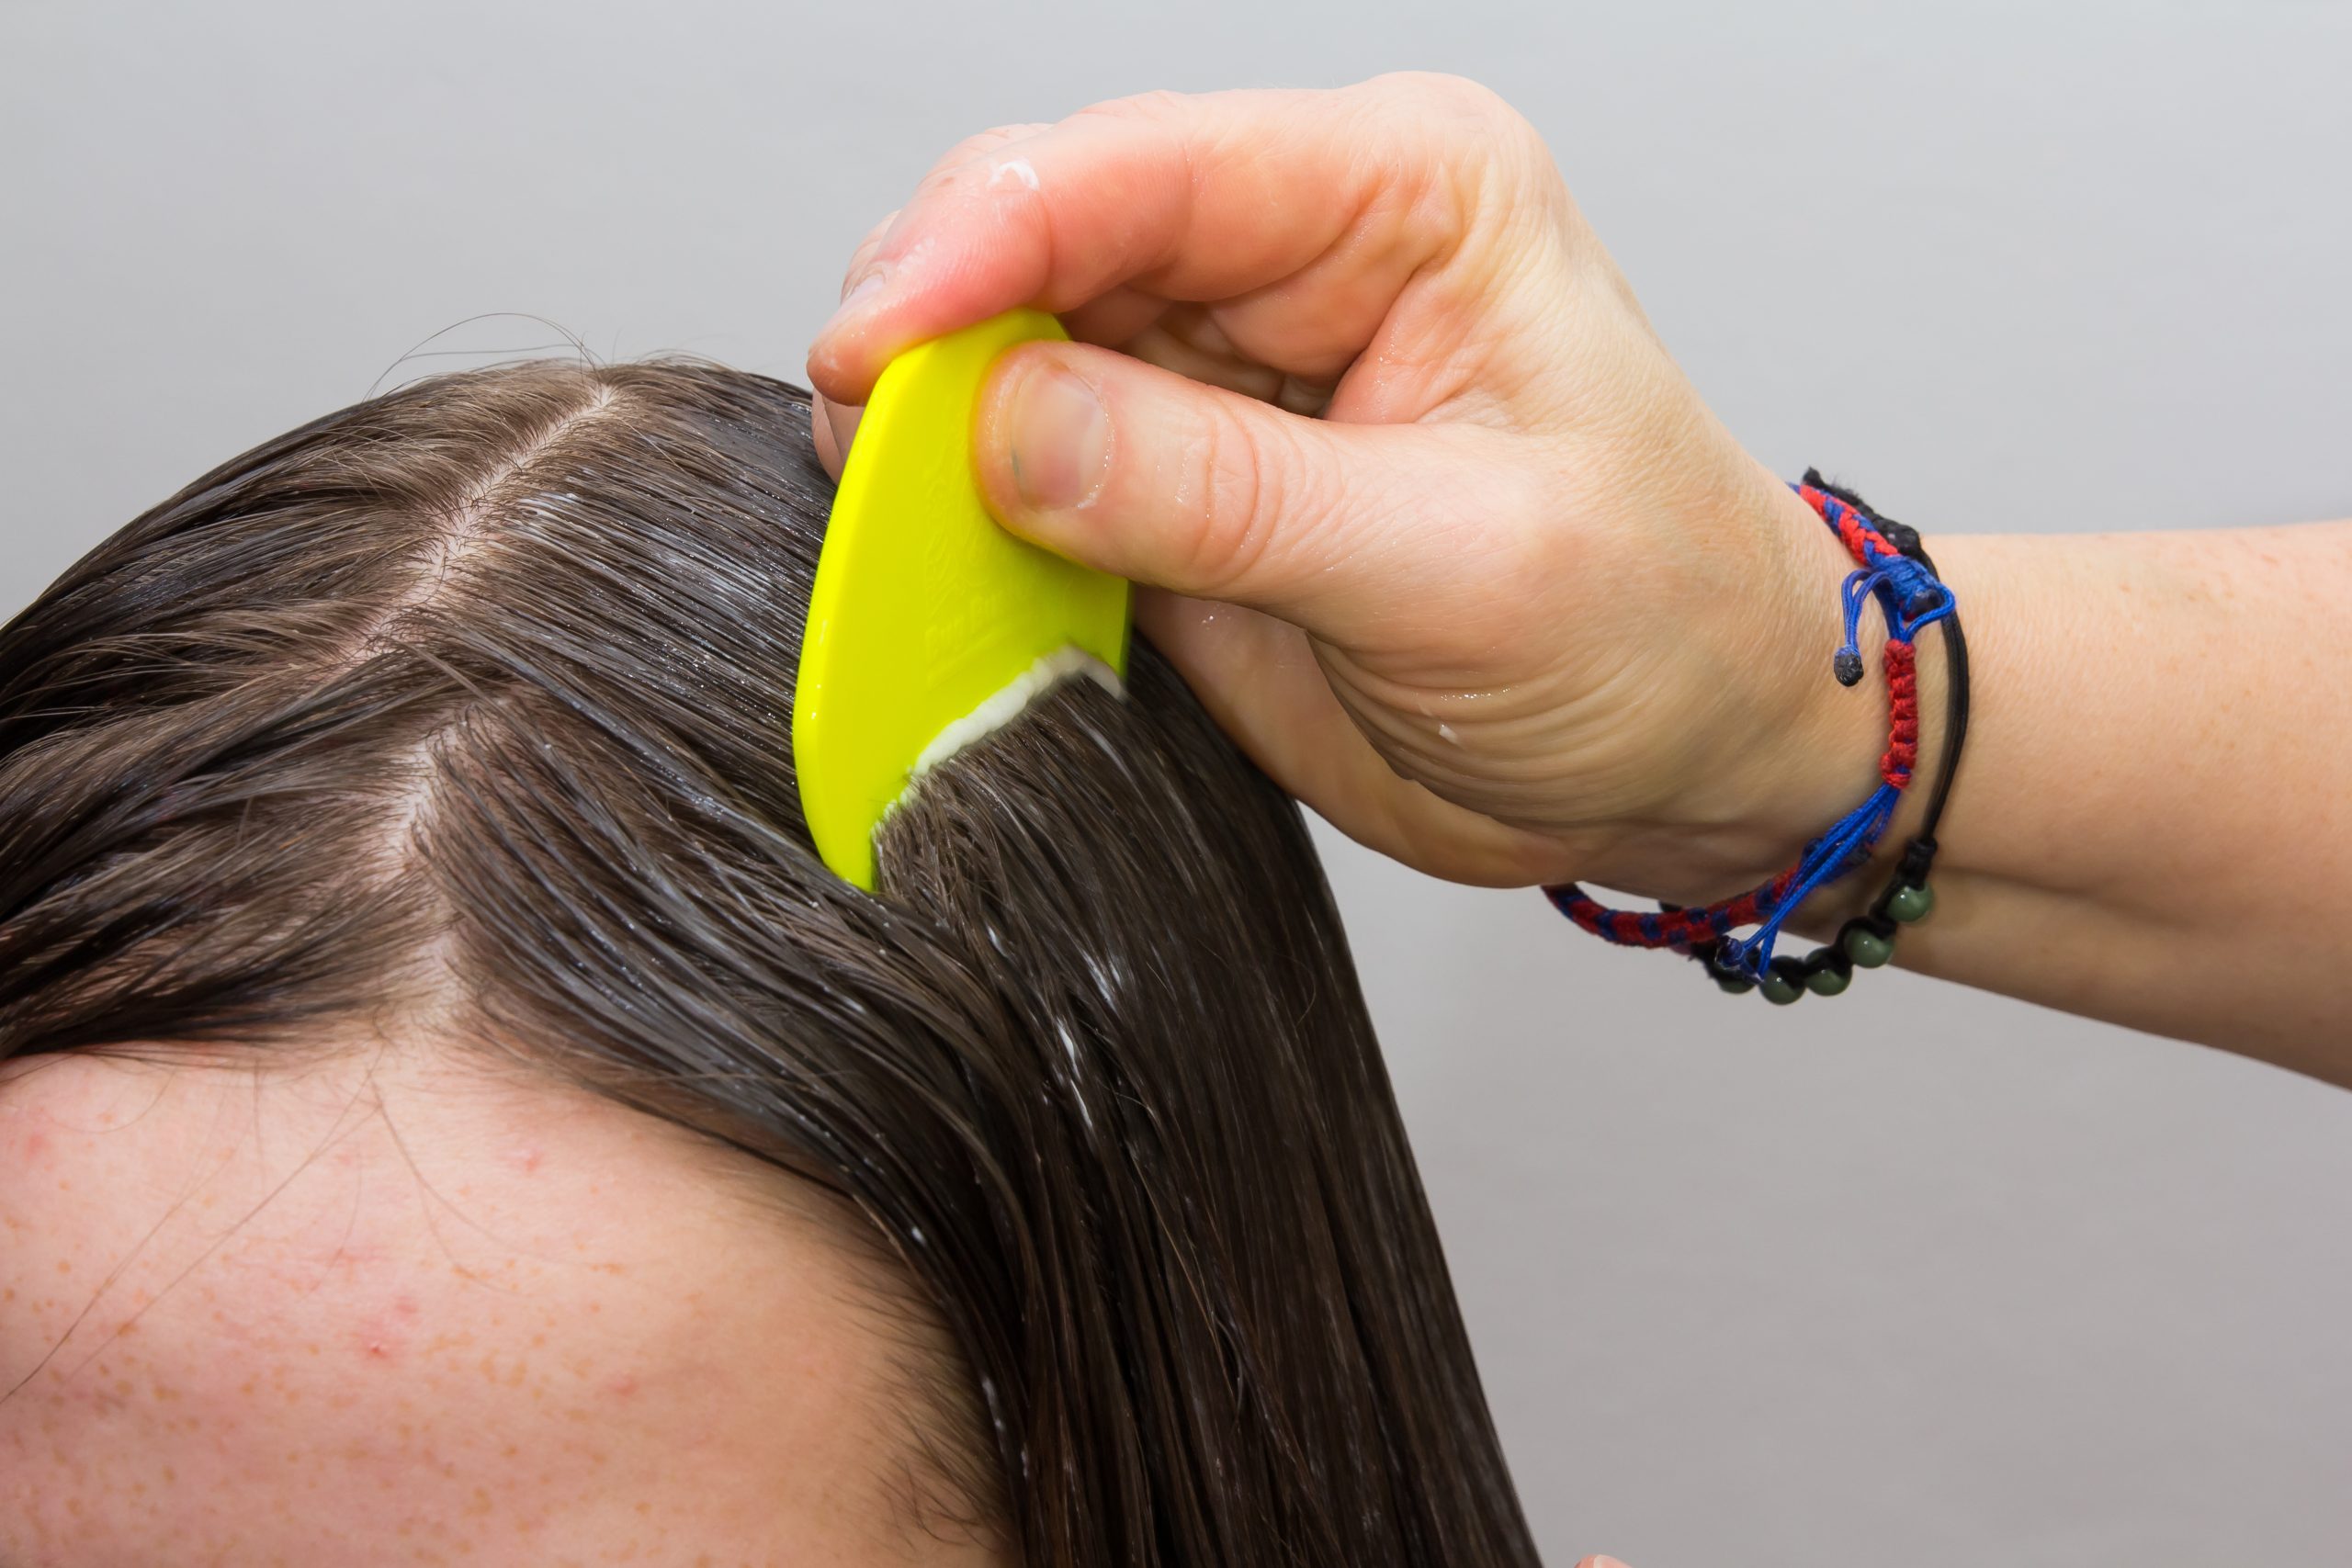 wet combing to remove lice in hair